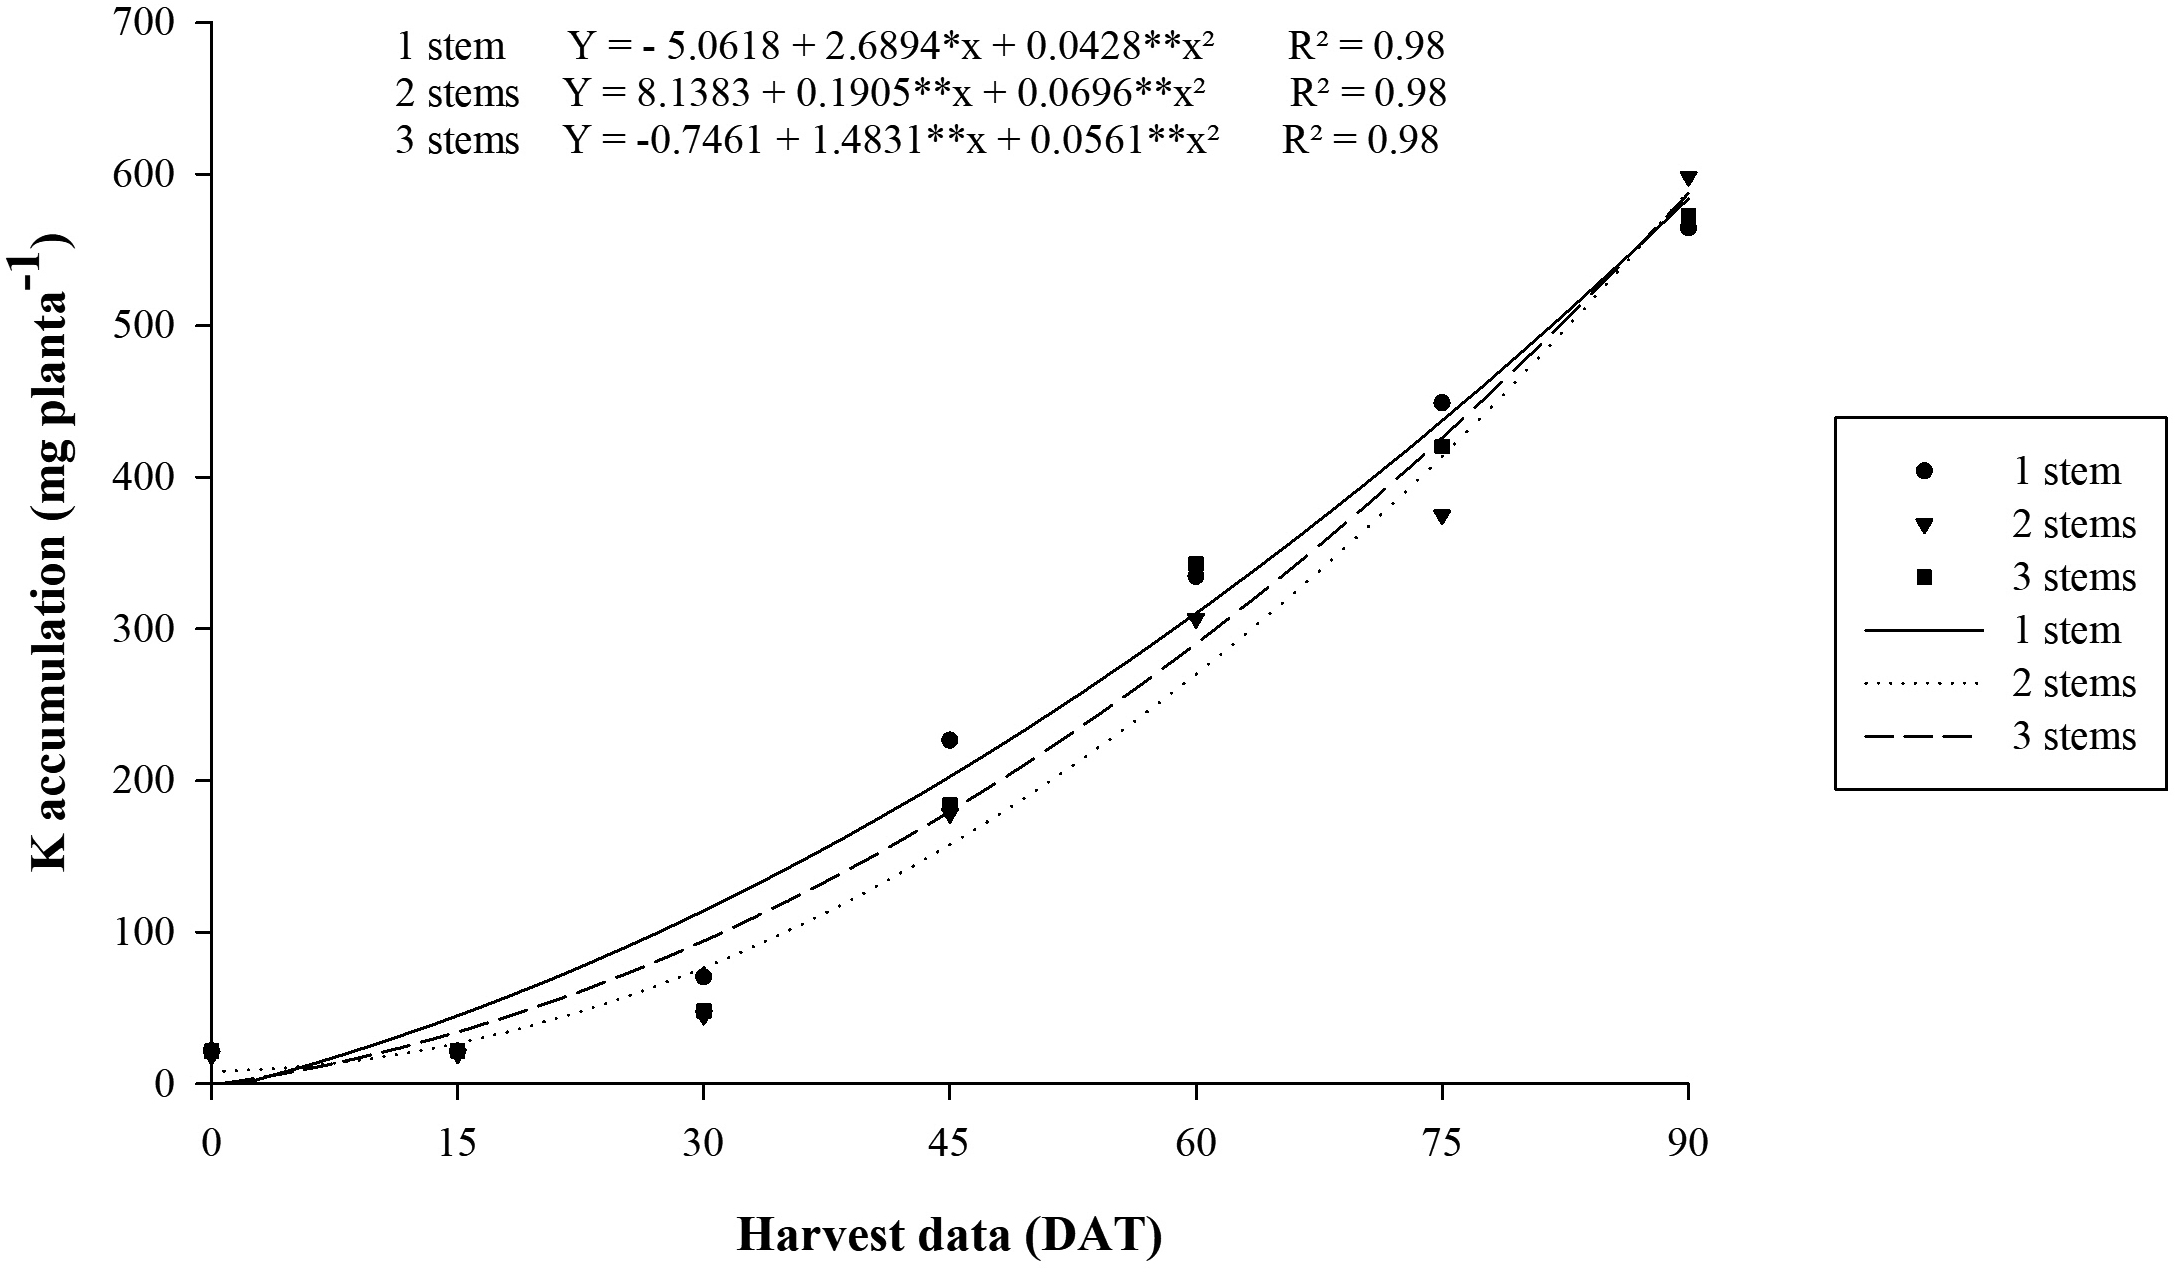 K accumulation through the lifecycle of goldenrod plants grown with one,
two and three stems. *, ** Significant at P
≤ 0.05 or 0.01, respectively. 

 